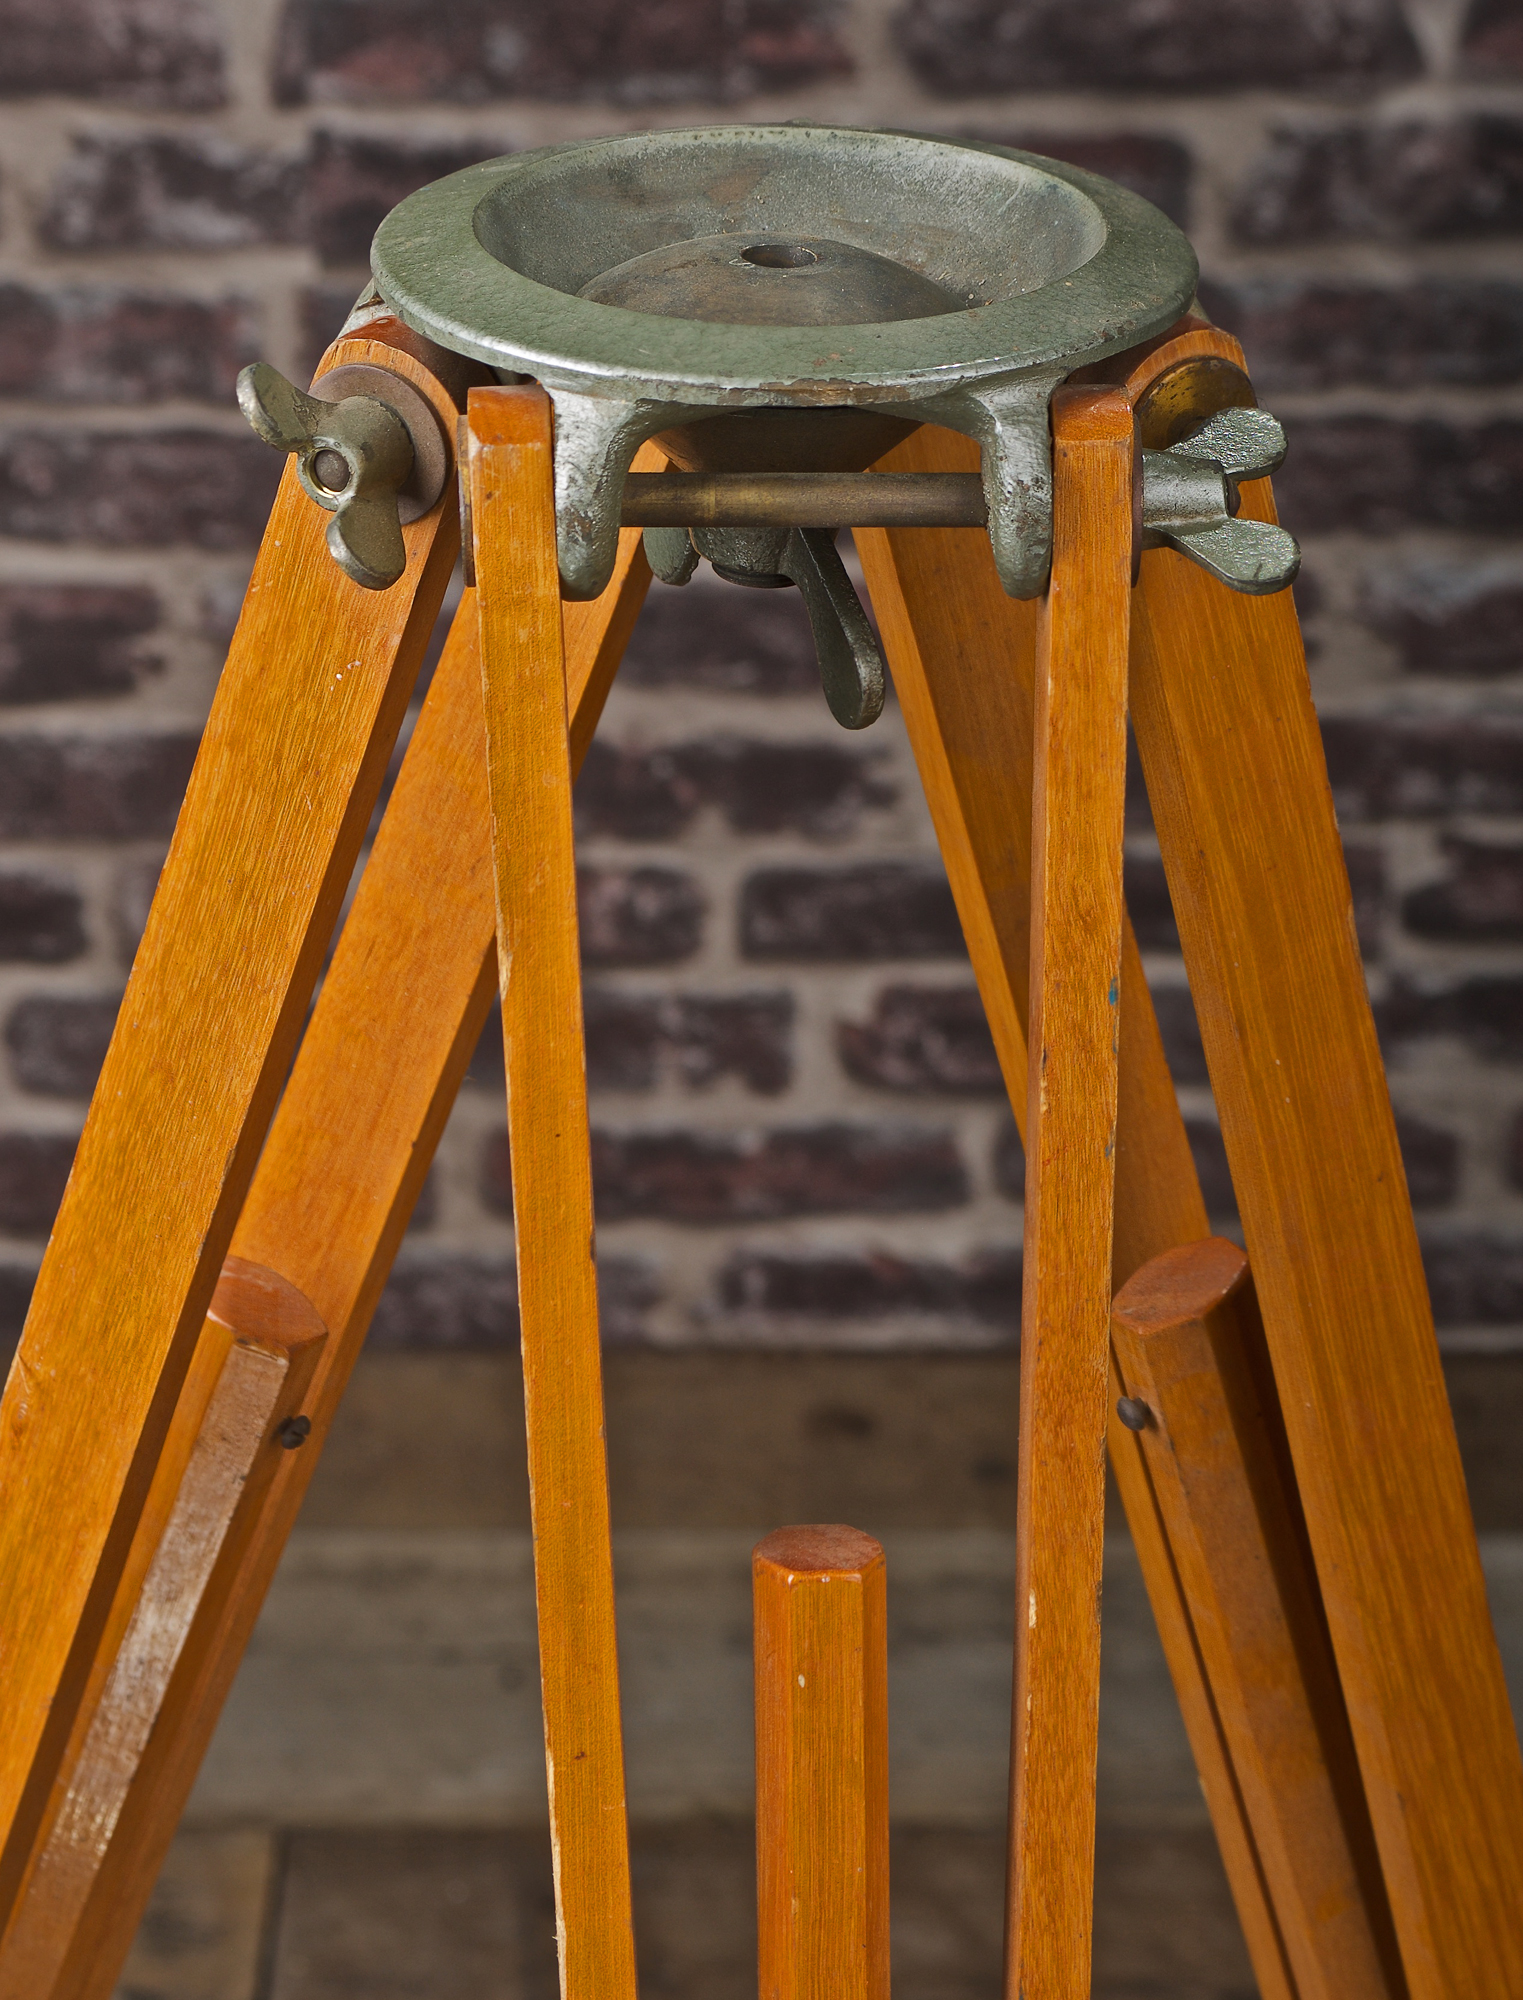 VINTAGE ADJUSTABLE TIMBER WITH DOME HEAD MOUNT TRIPOD